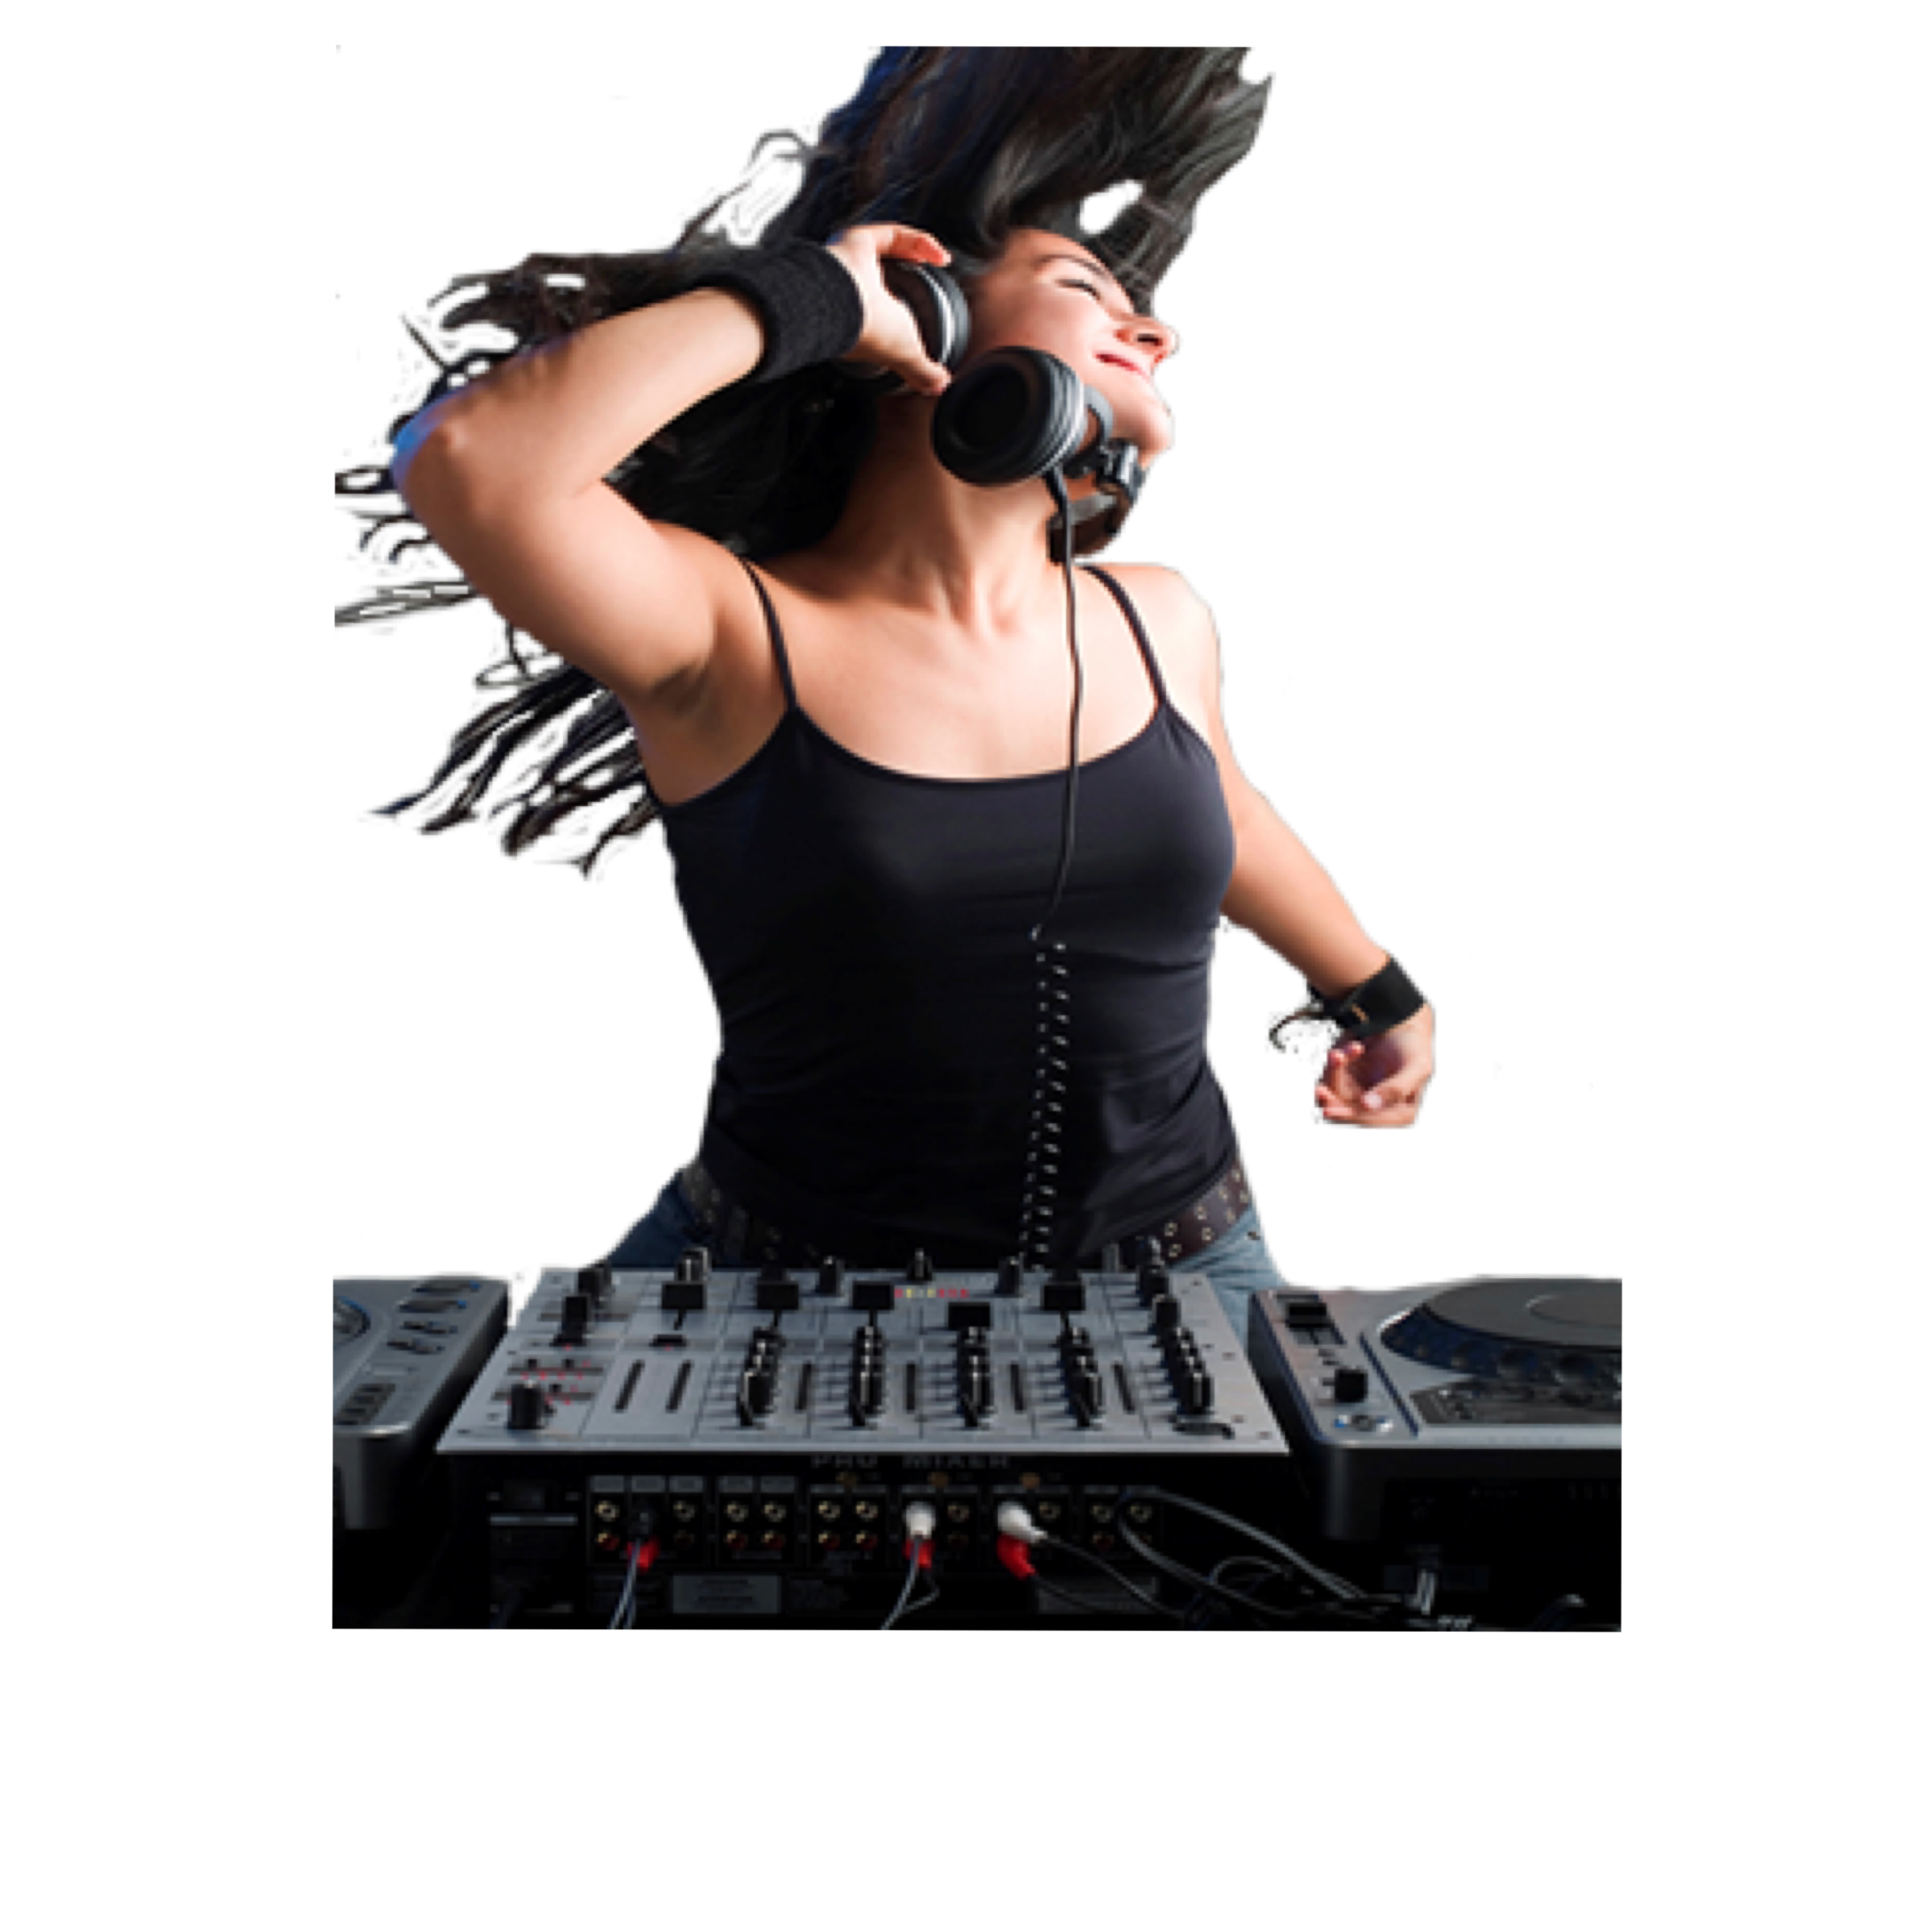 Party DJ Girl PNG Image